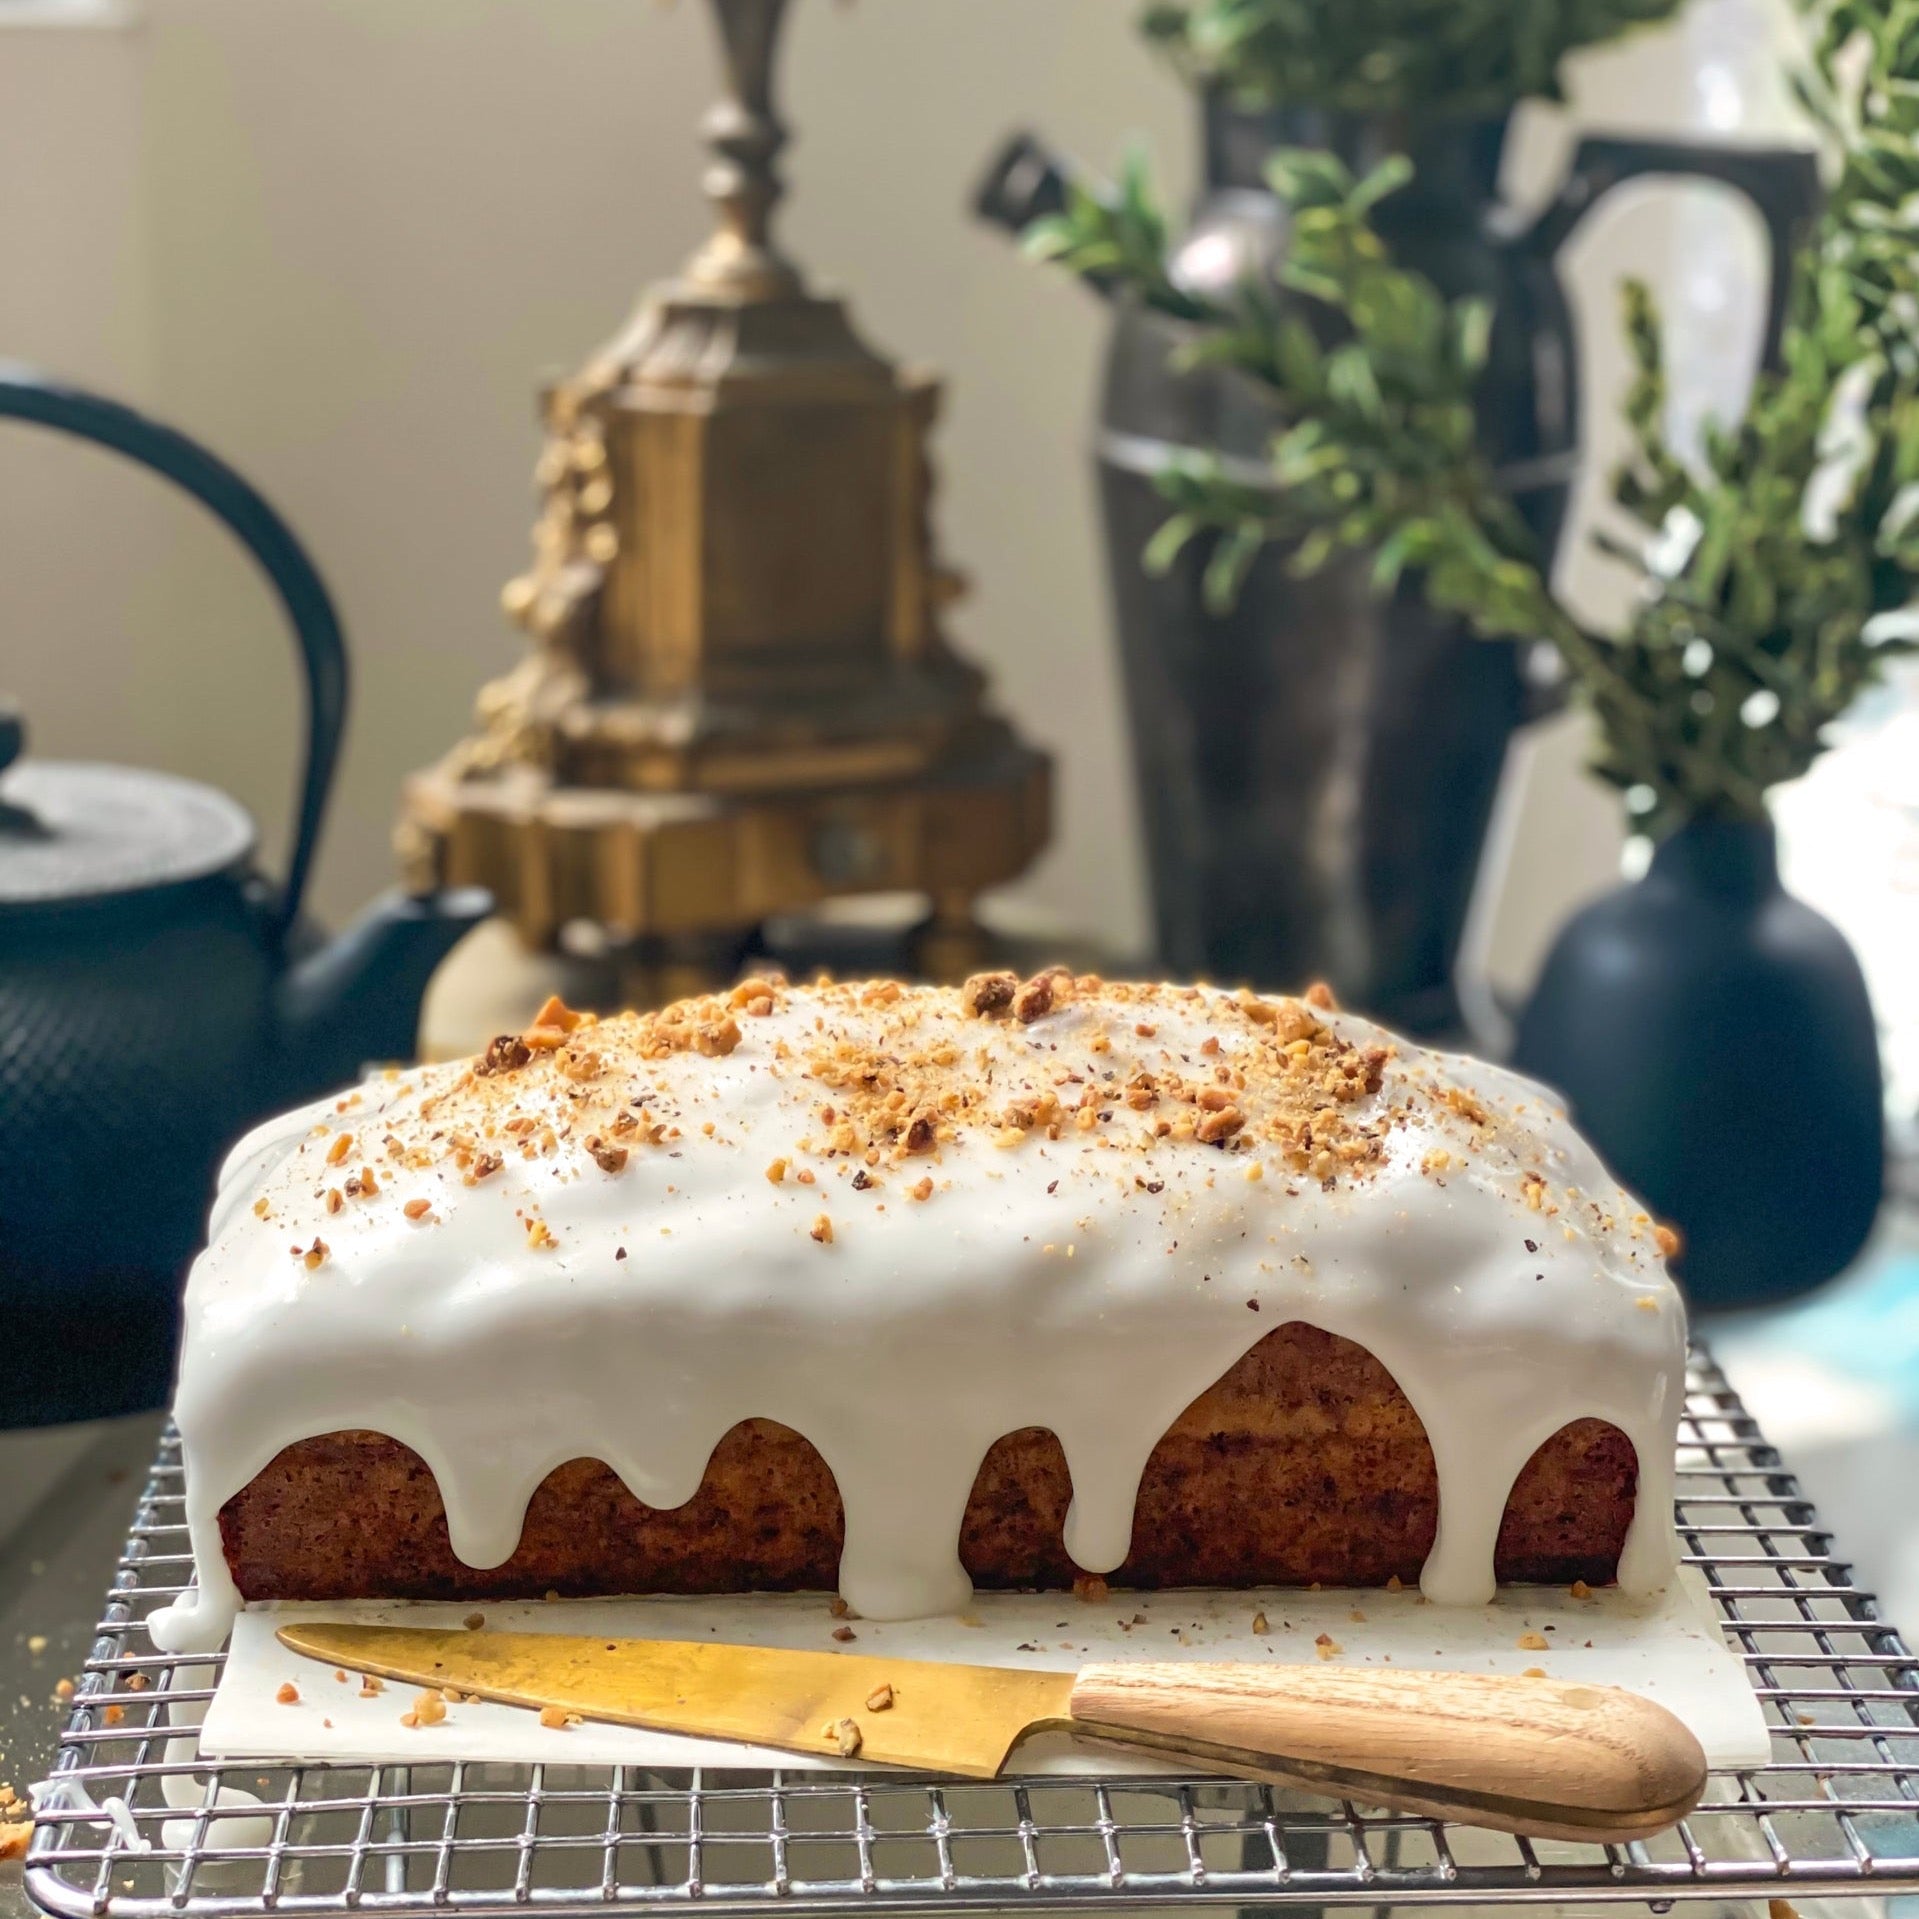 Carrot Cake Mix (2 Loaf Cakes)